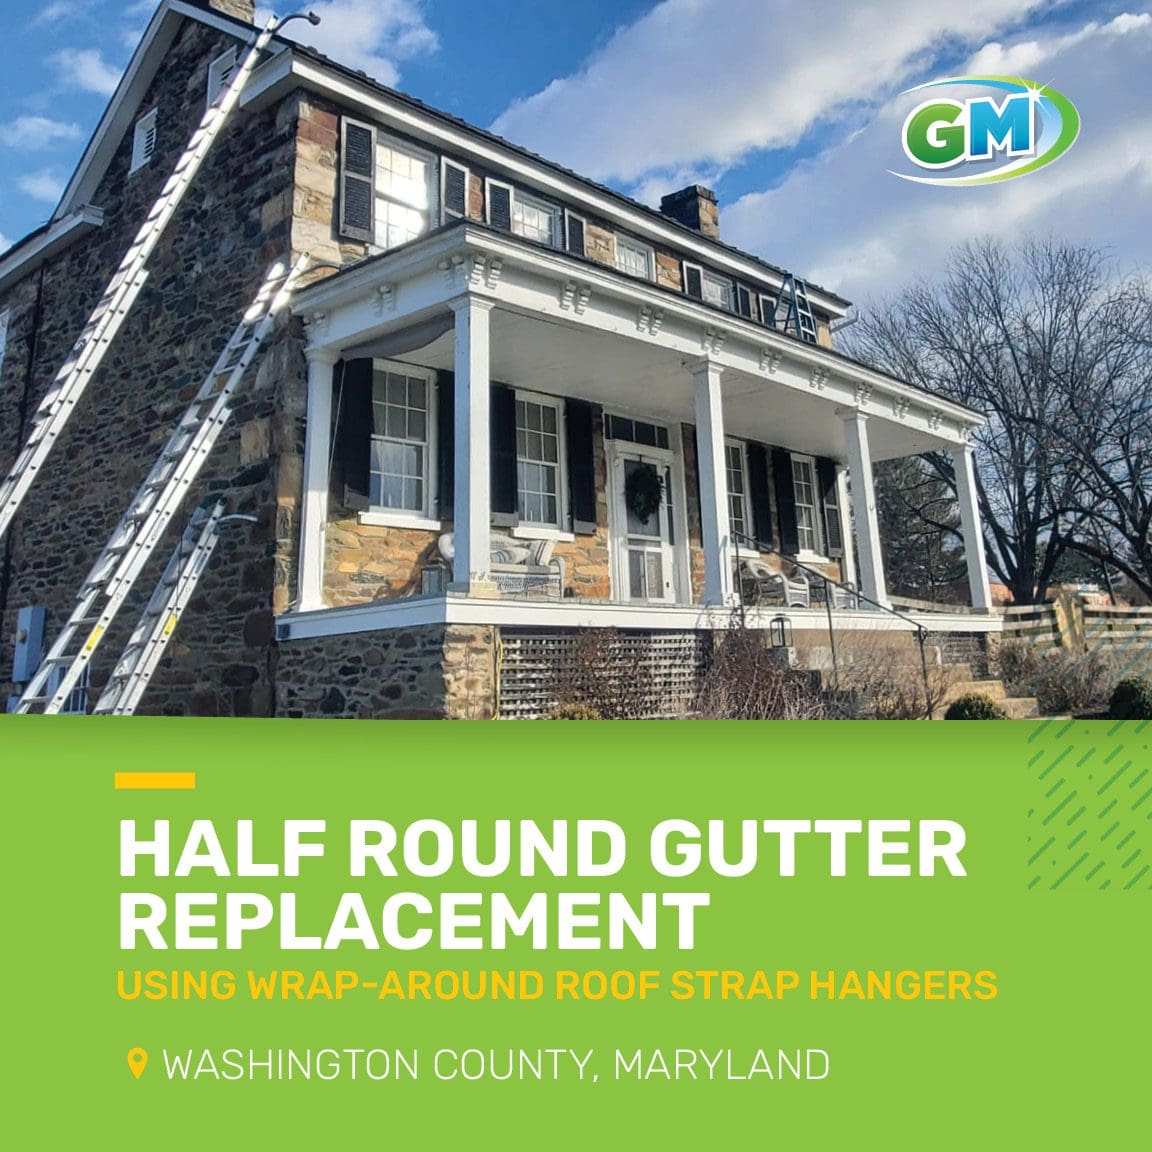 Half round gutter replacement using wrap around roof strap hangers in Washington county Maryland